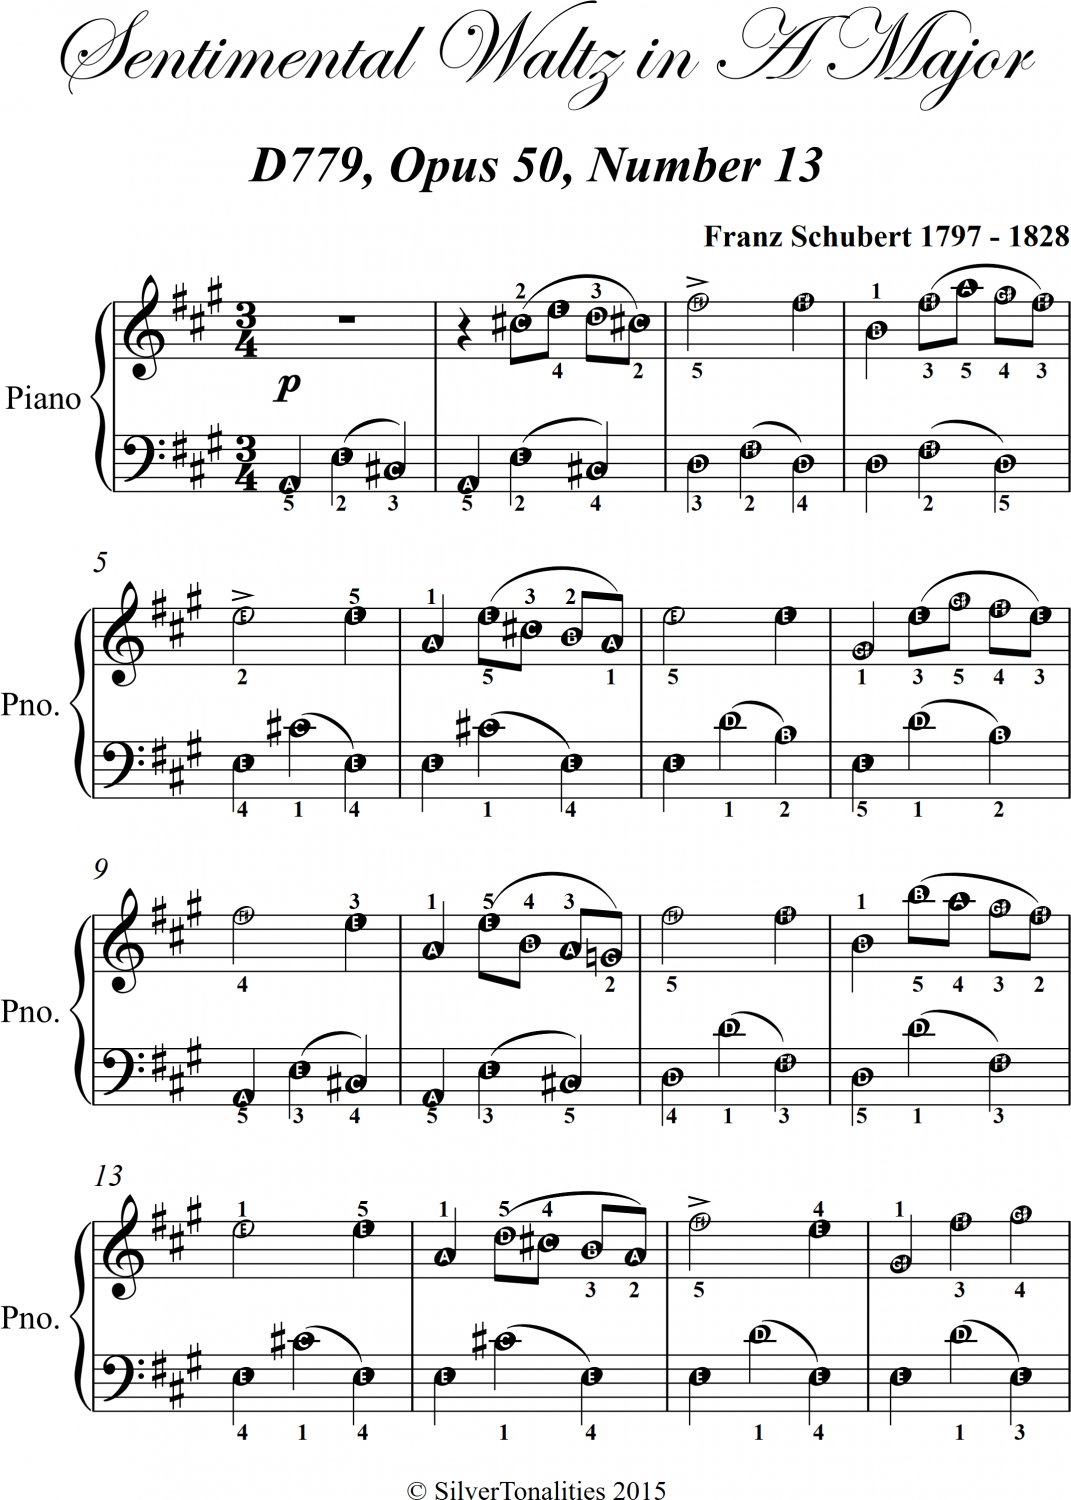 Sentimental Waltz in A Major Opus 50 Number 13 Easy Piano Sheet Music